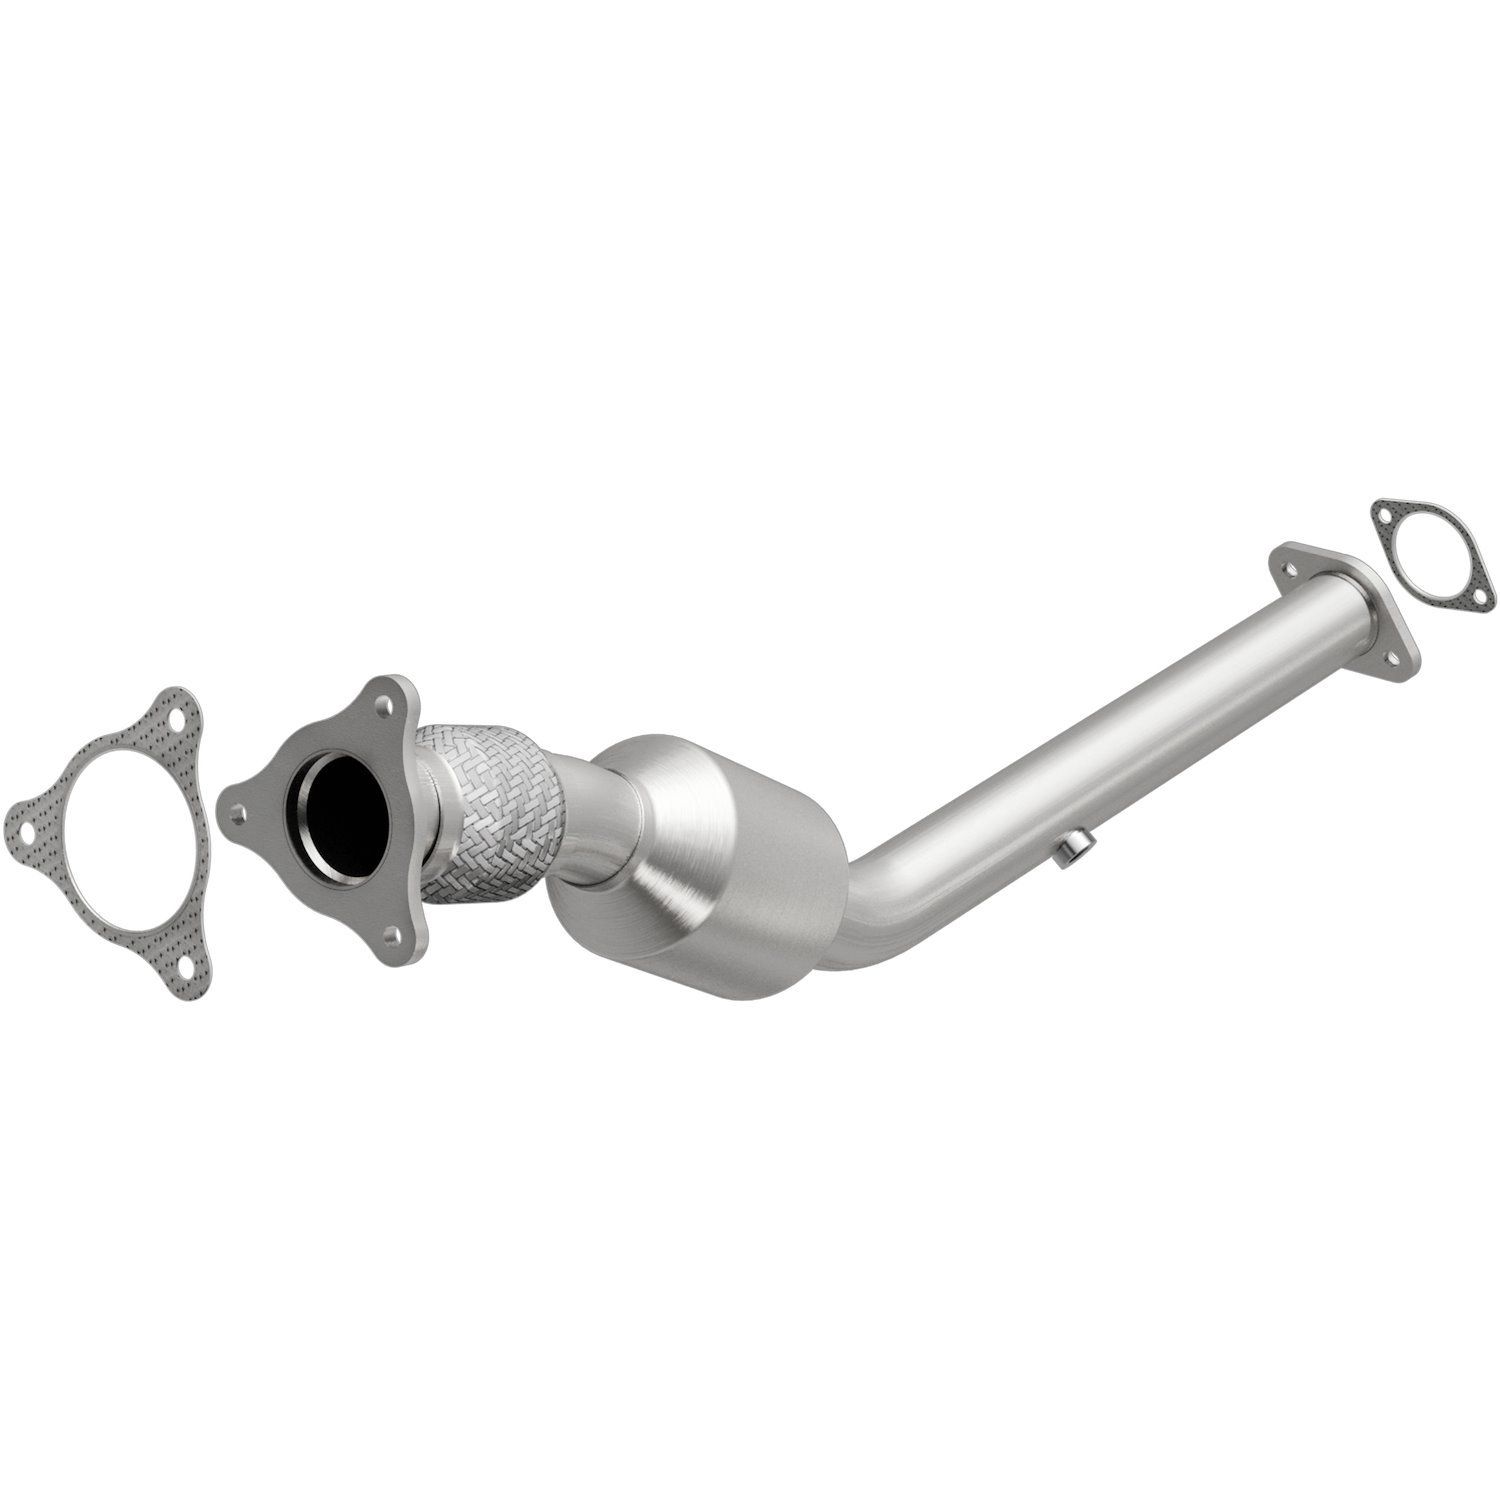 OEM Grade Federal / EPA Compliant Direct-Fit Catalytic Converter 52106